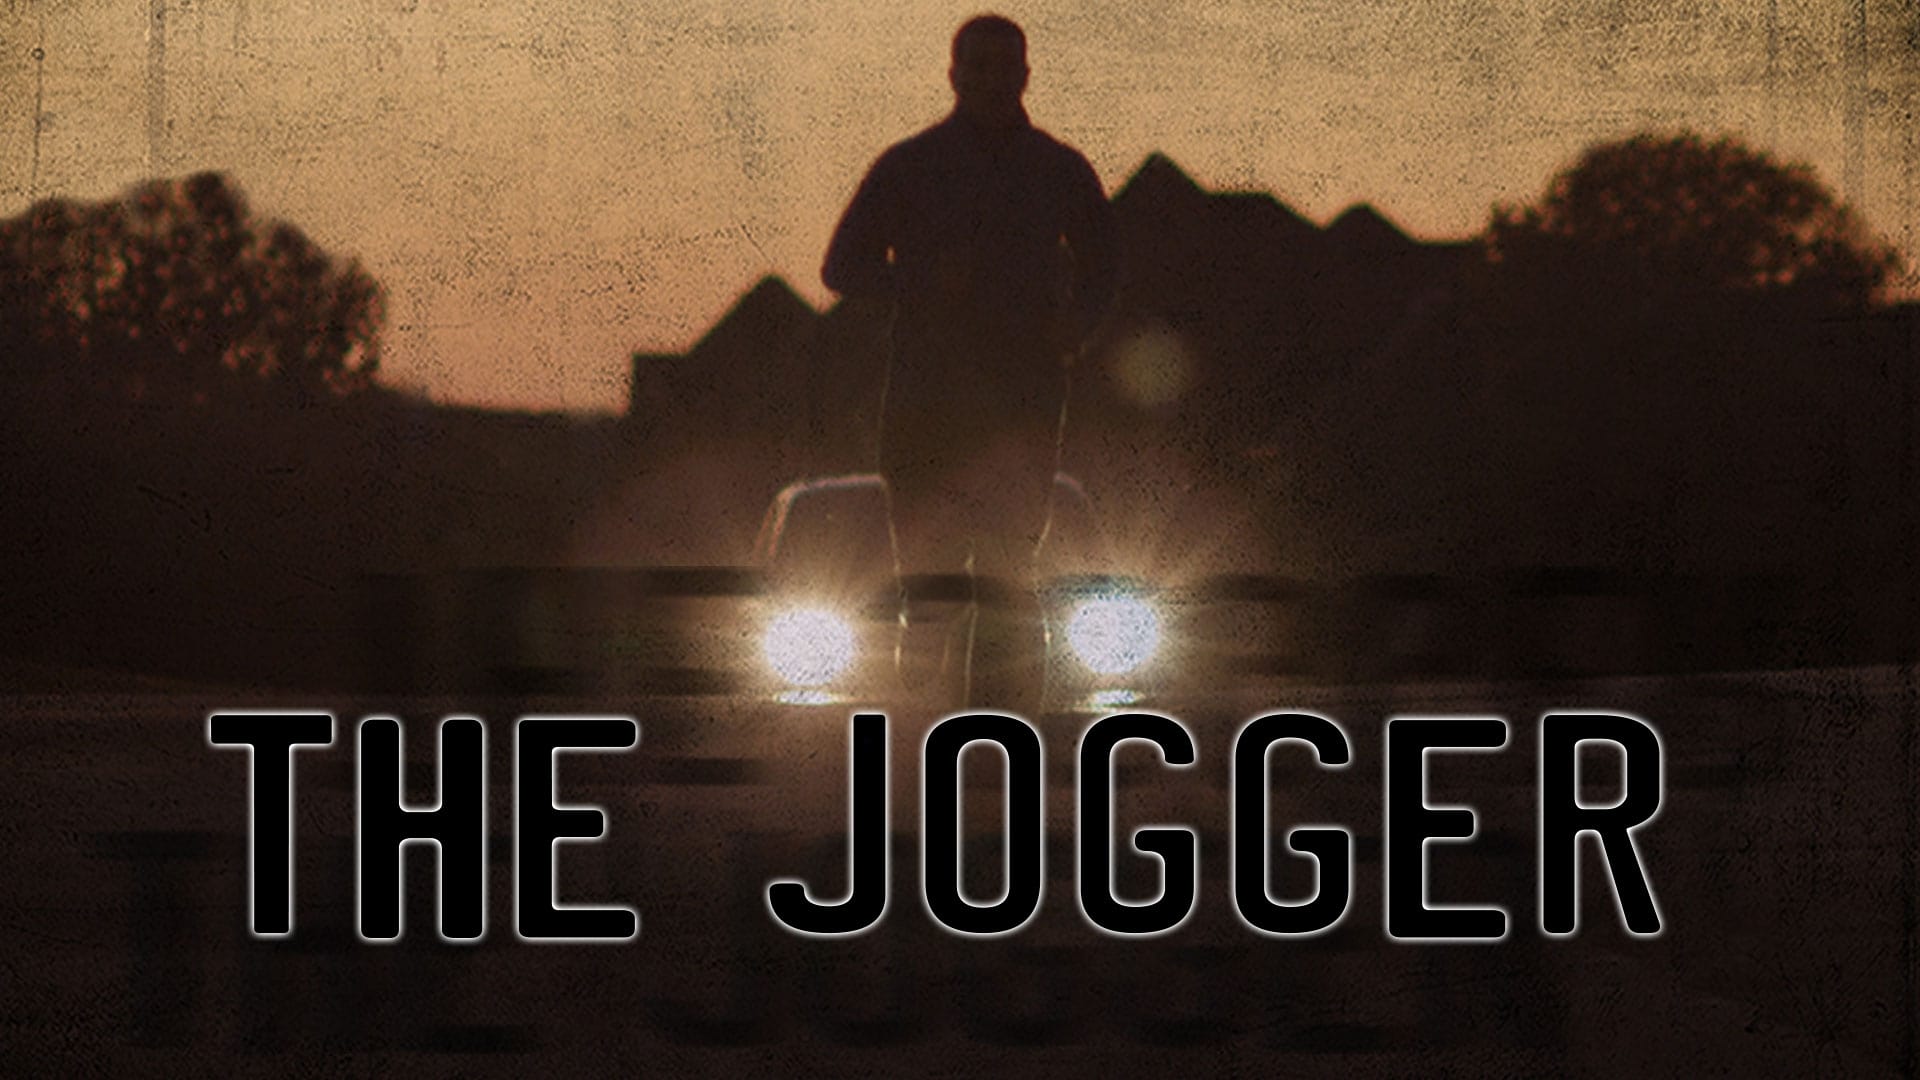 The Jogger (2013)